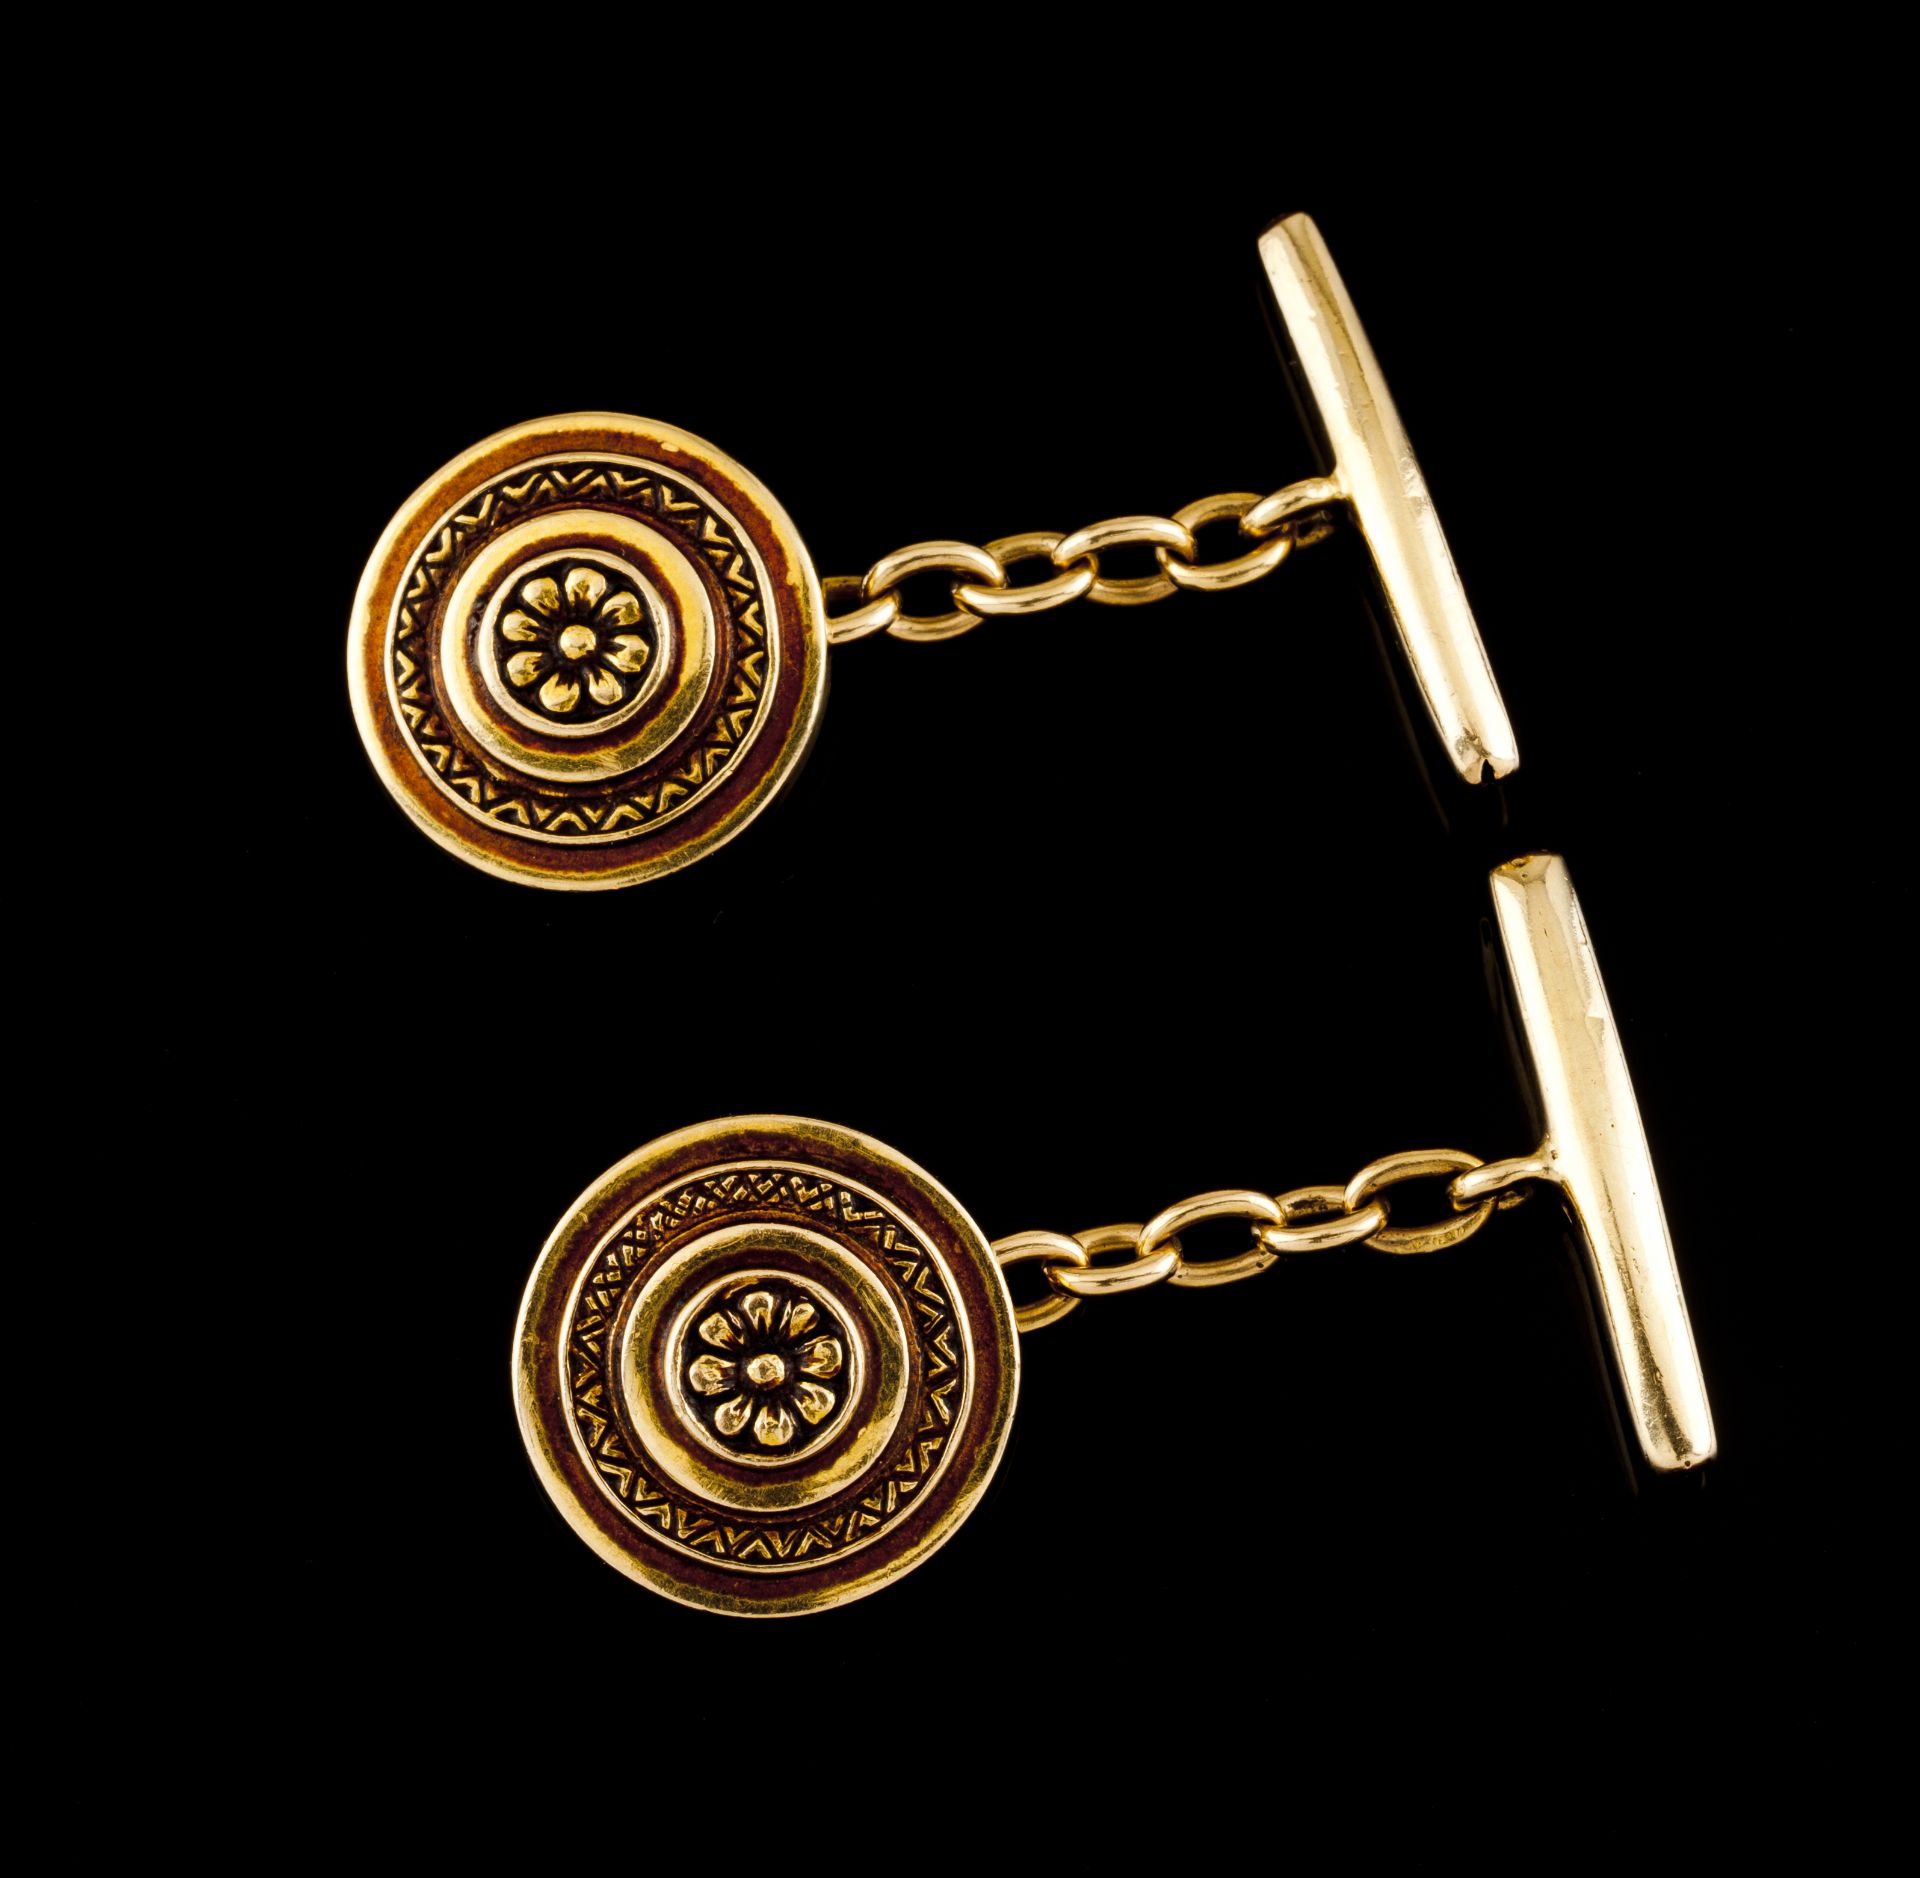 A pair of cufflinksPortuguese goldCircular shaped engraved with framed central flowerOporto